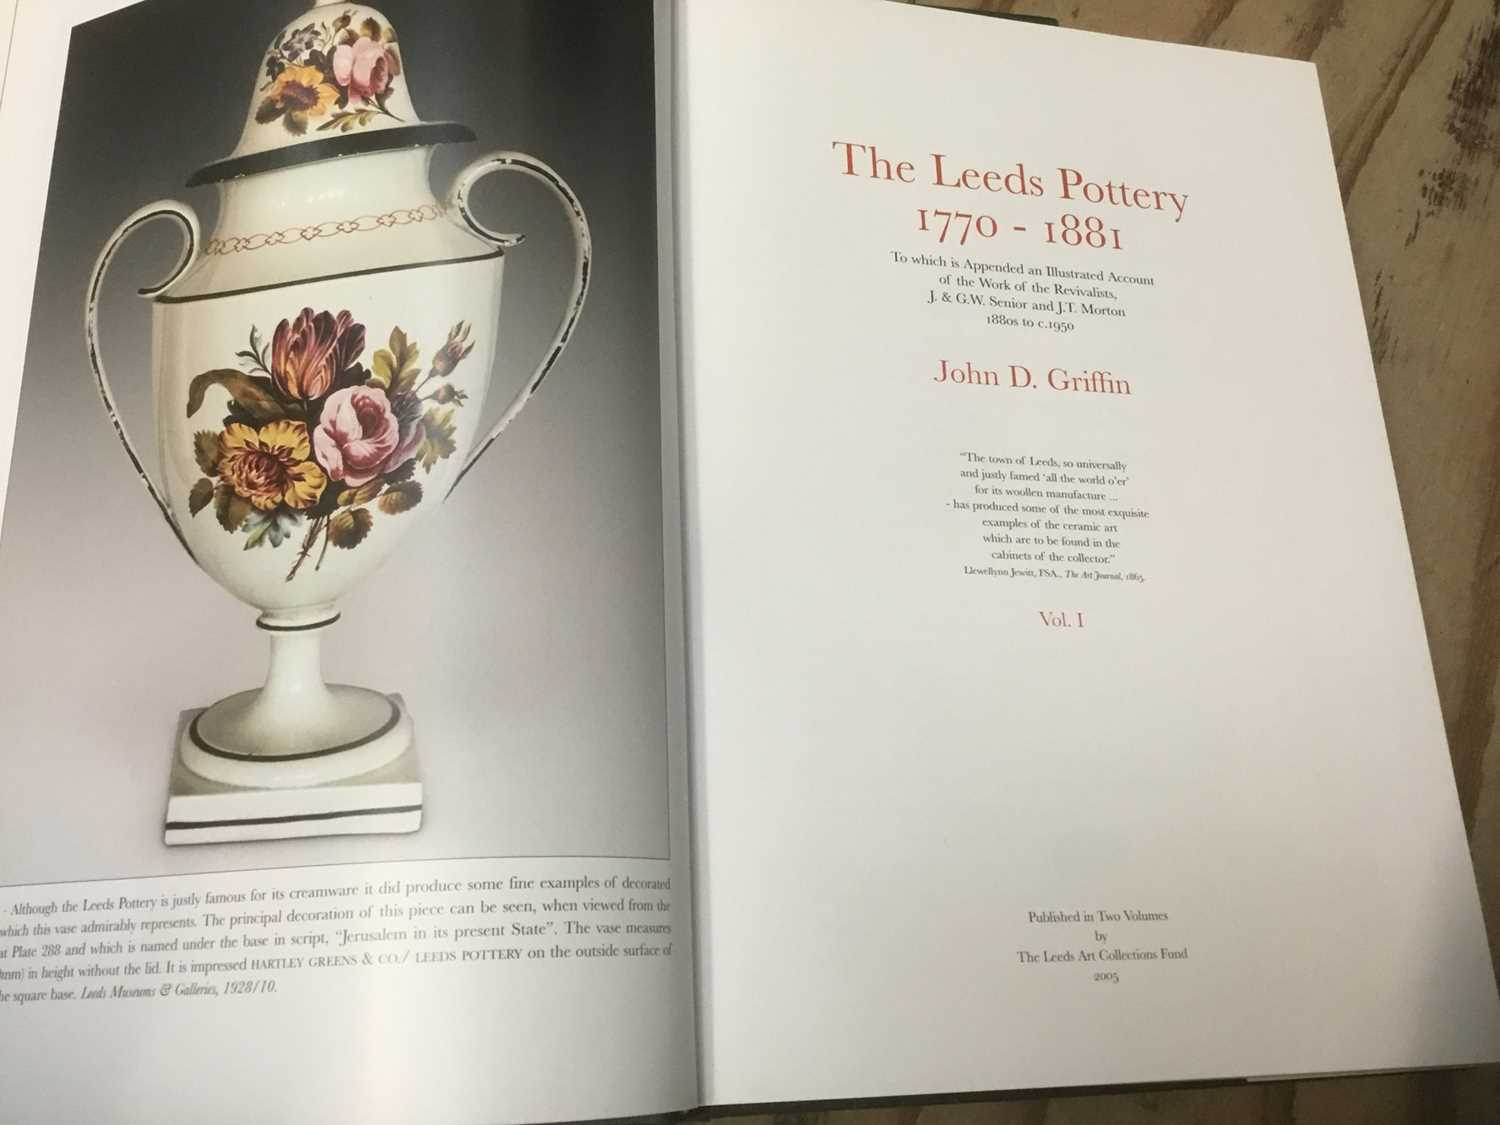 John D Griffin - The Leeds Pottery 1770-1881, The Leeds Art Collections Fund 2005, 1st edition, 2 Vo - Image 2 of 2